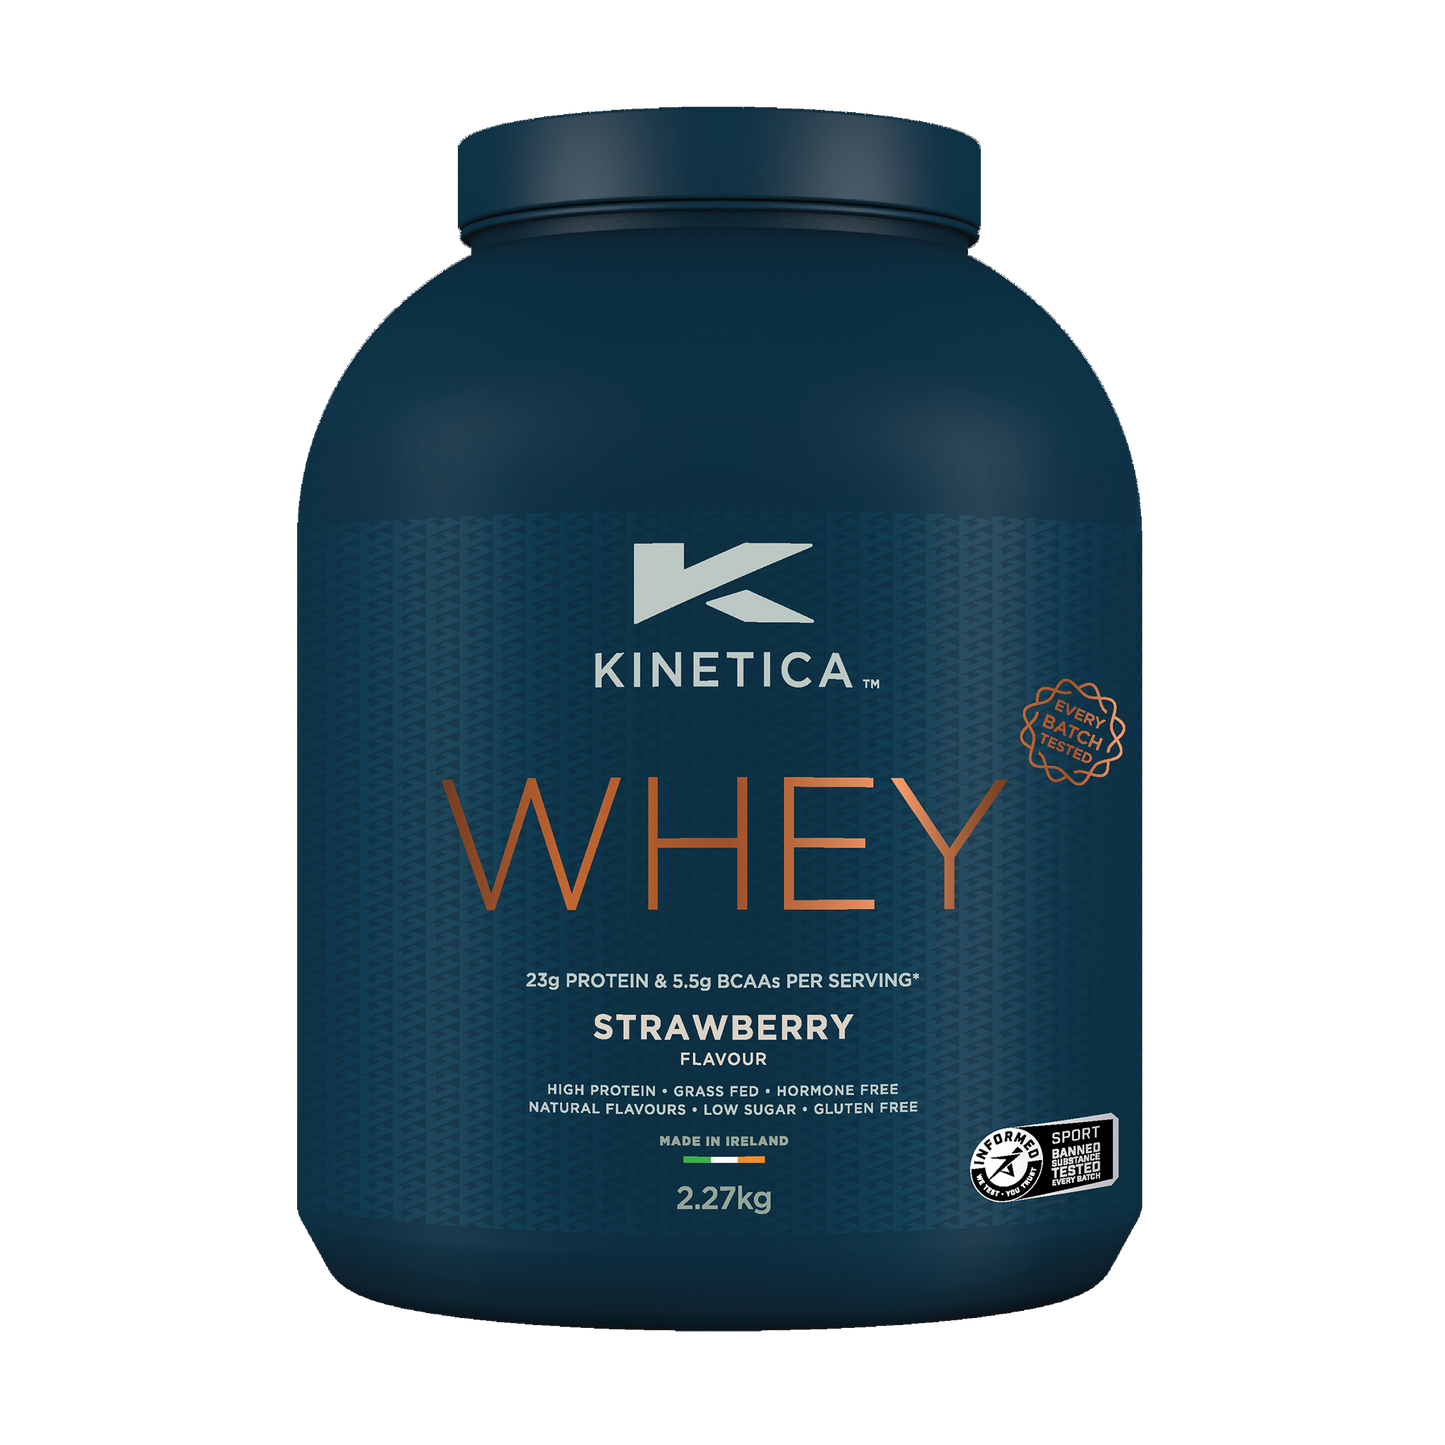 KINETICA WHEY PROTEIN 2.27KG